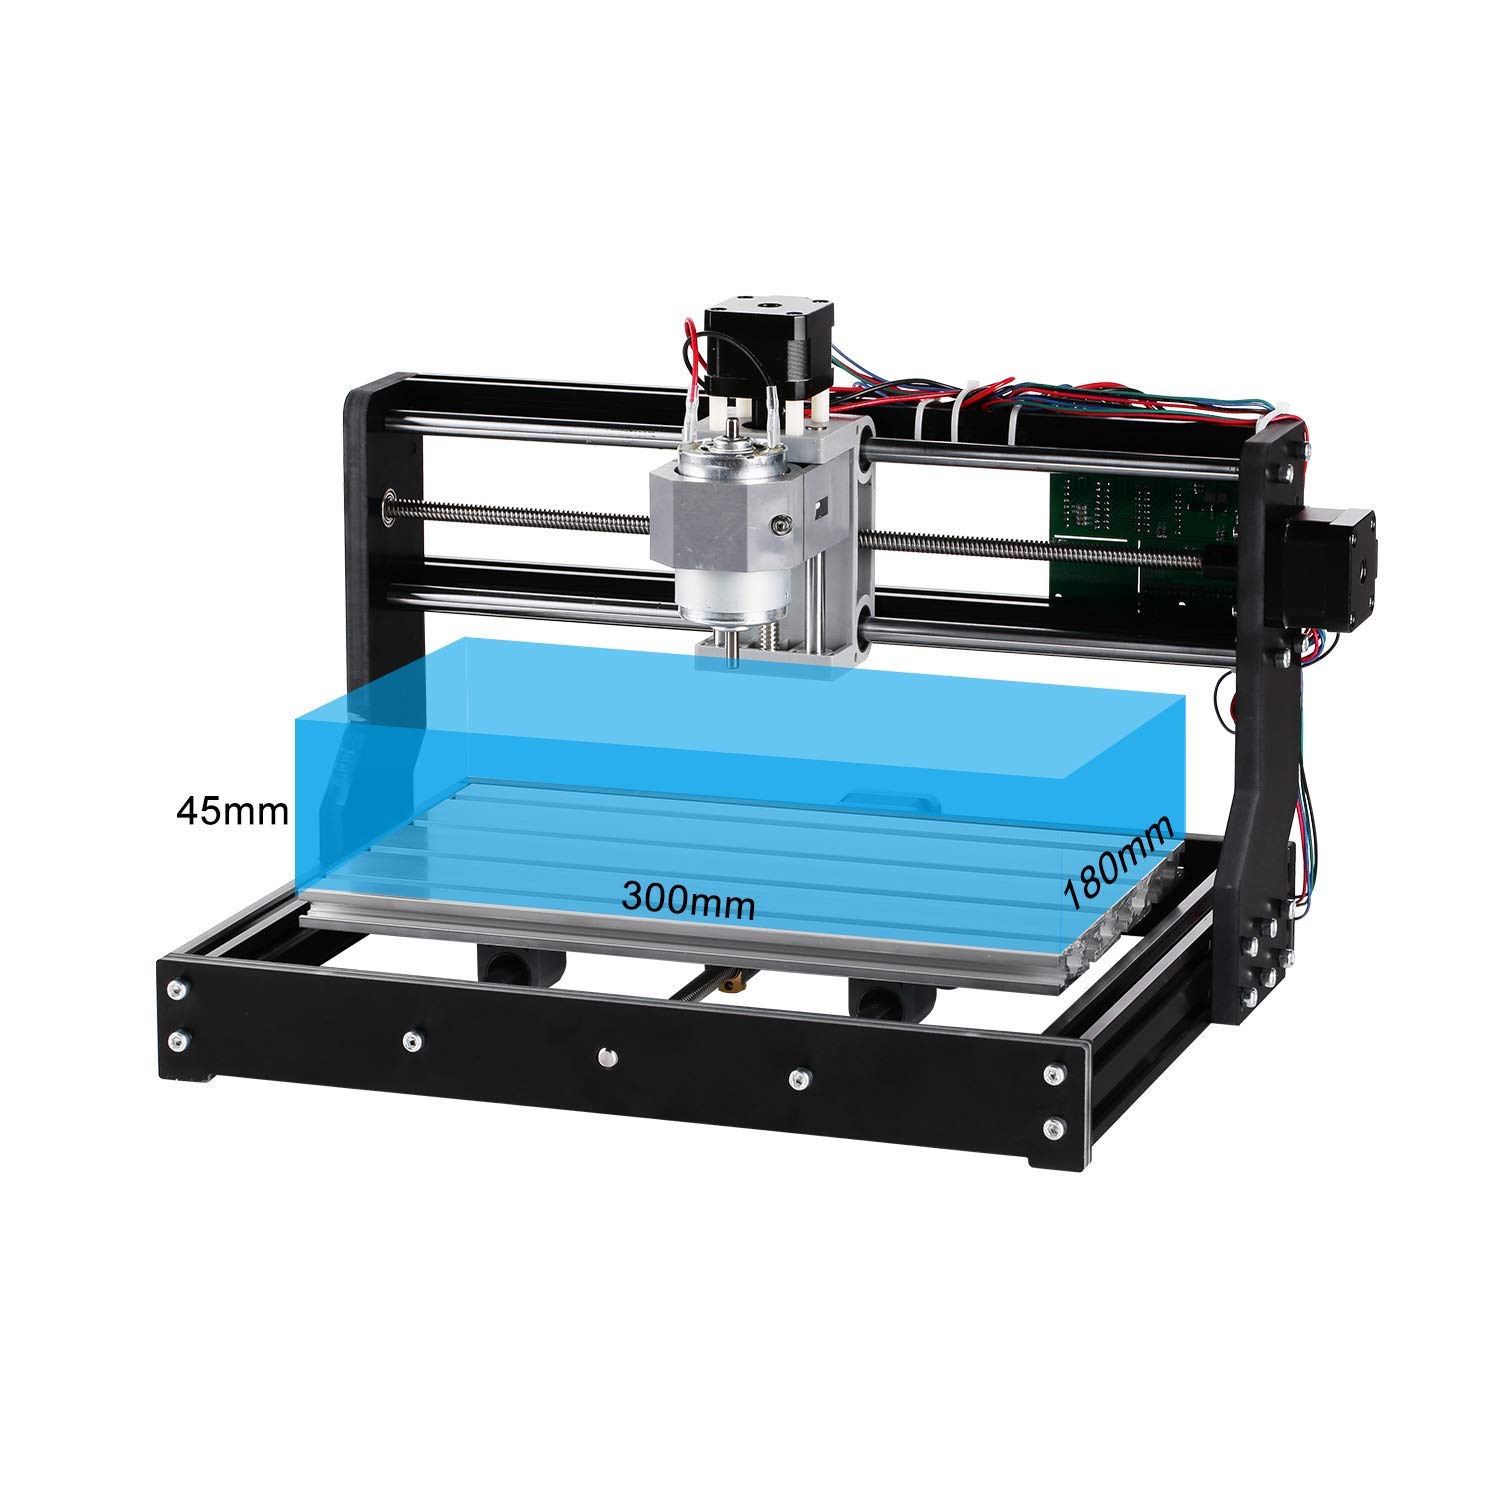 Fanrsquoensheng-3018-Pro-3-Axis-Mini-DIY-CNC-Router-Adjustable-Speed-Spindle-Motor-Wood-Engraving-Ma-1463876-12